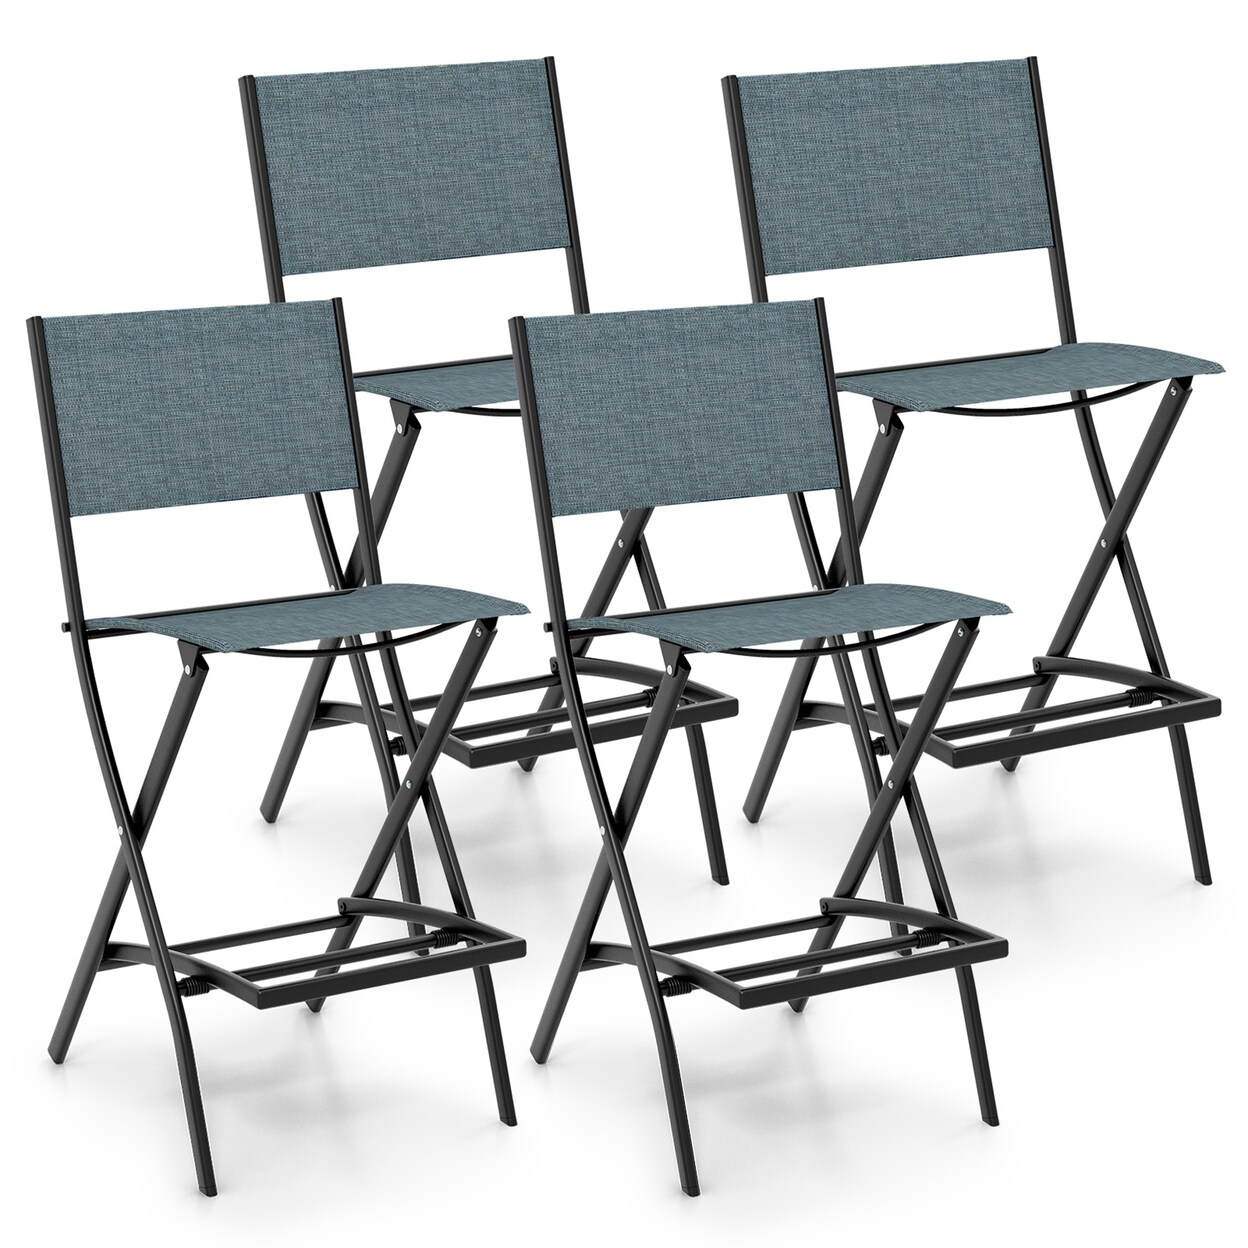 Gymax Folding Bar Stools Set of 4 Patio Sling Chairs w/ Backrest Humanized Footrest Blue